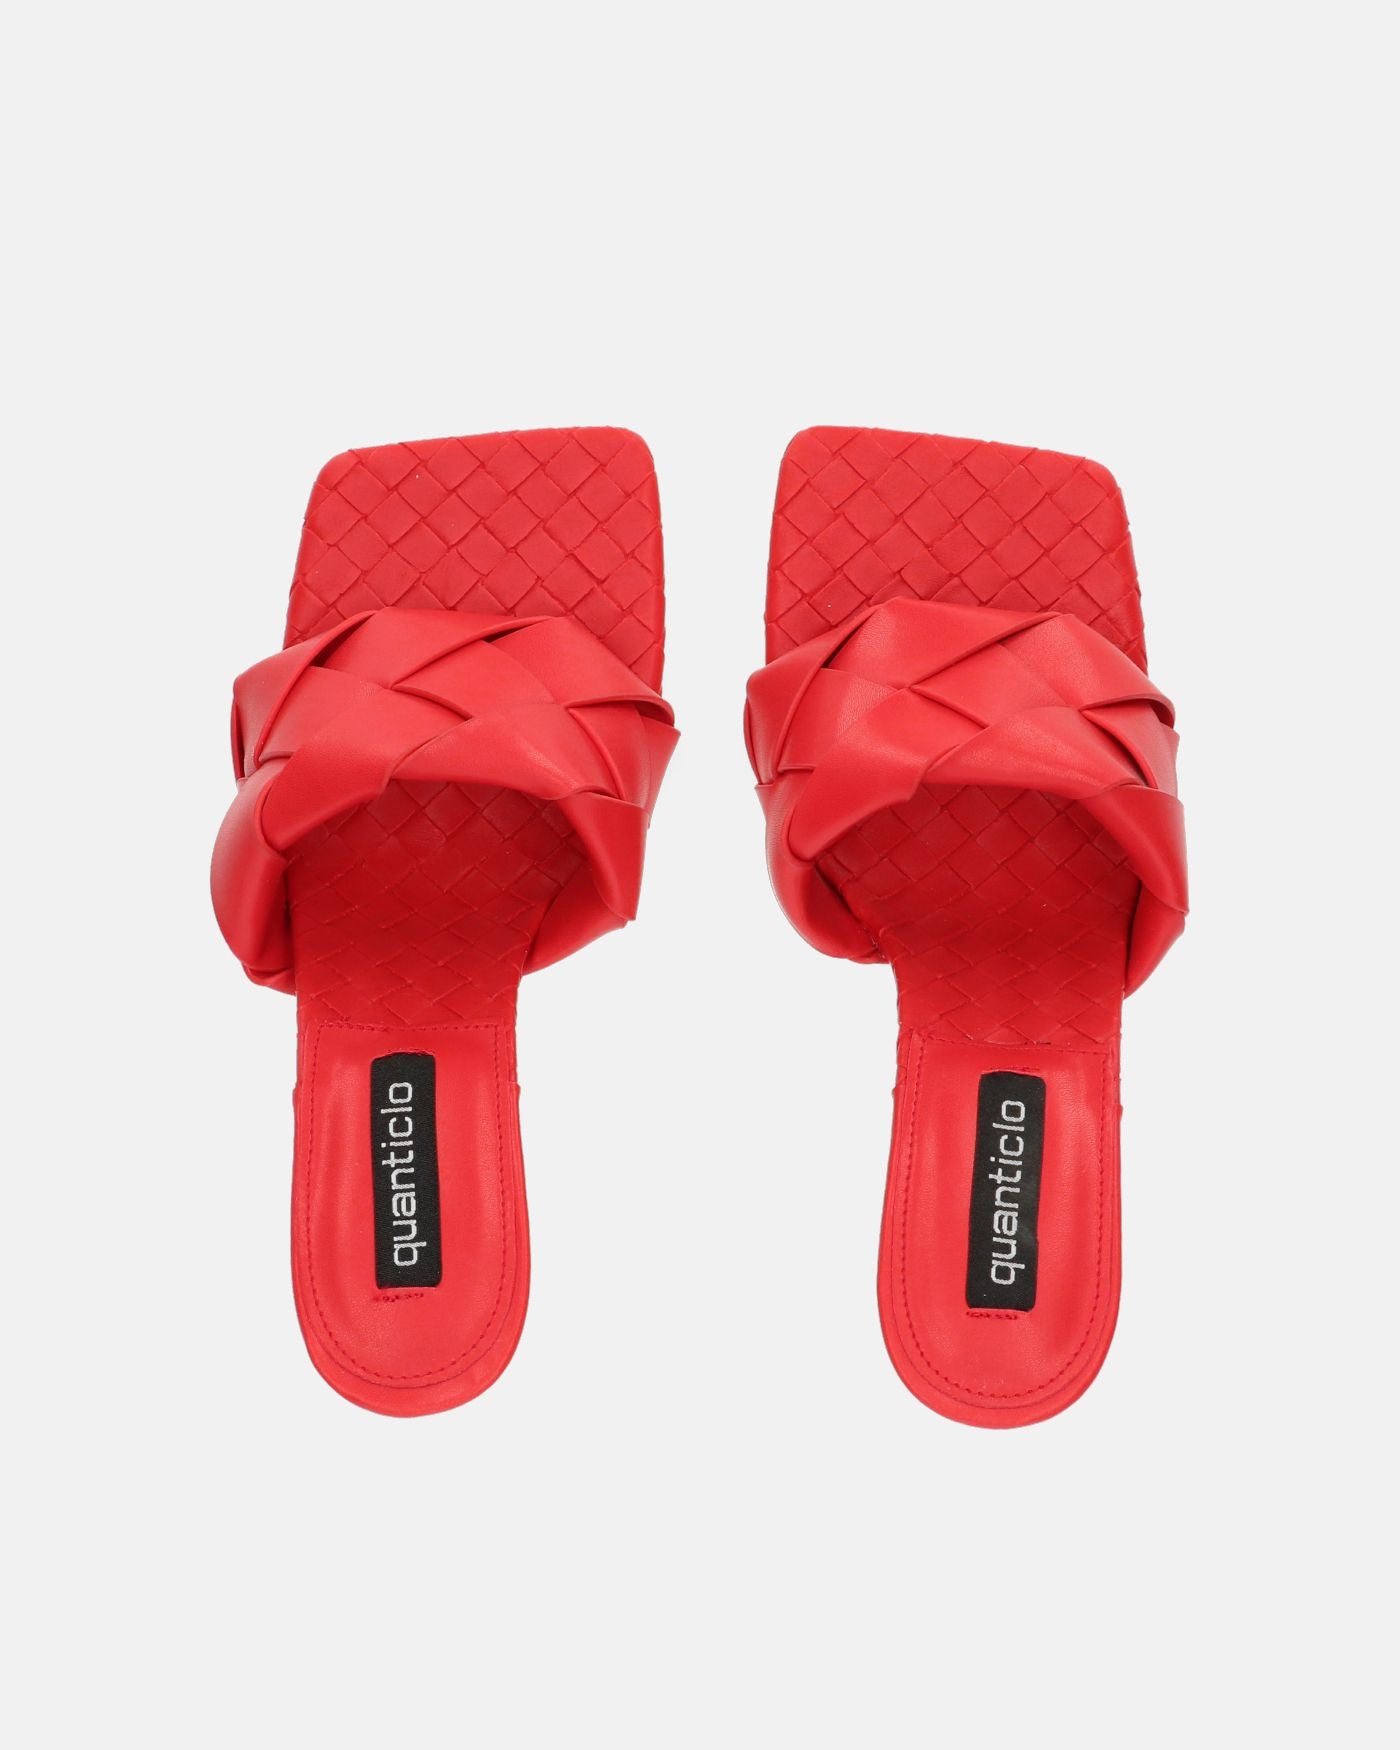 ENRICA - sandal in red woven leather with heel